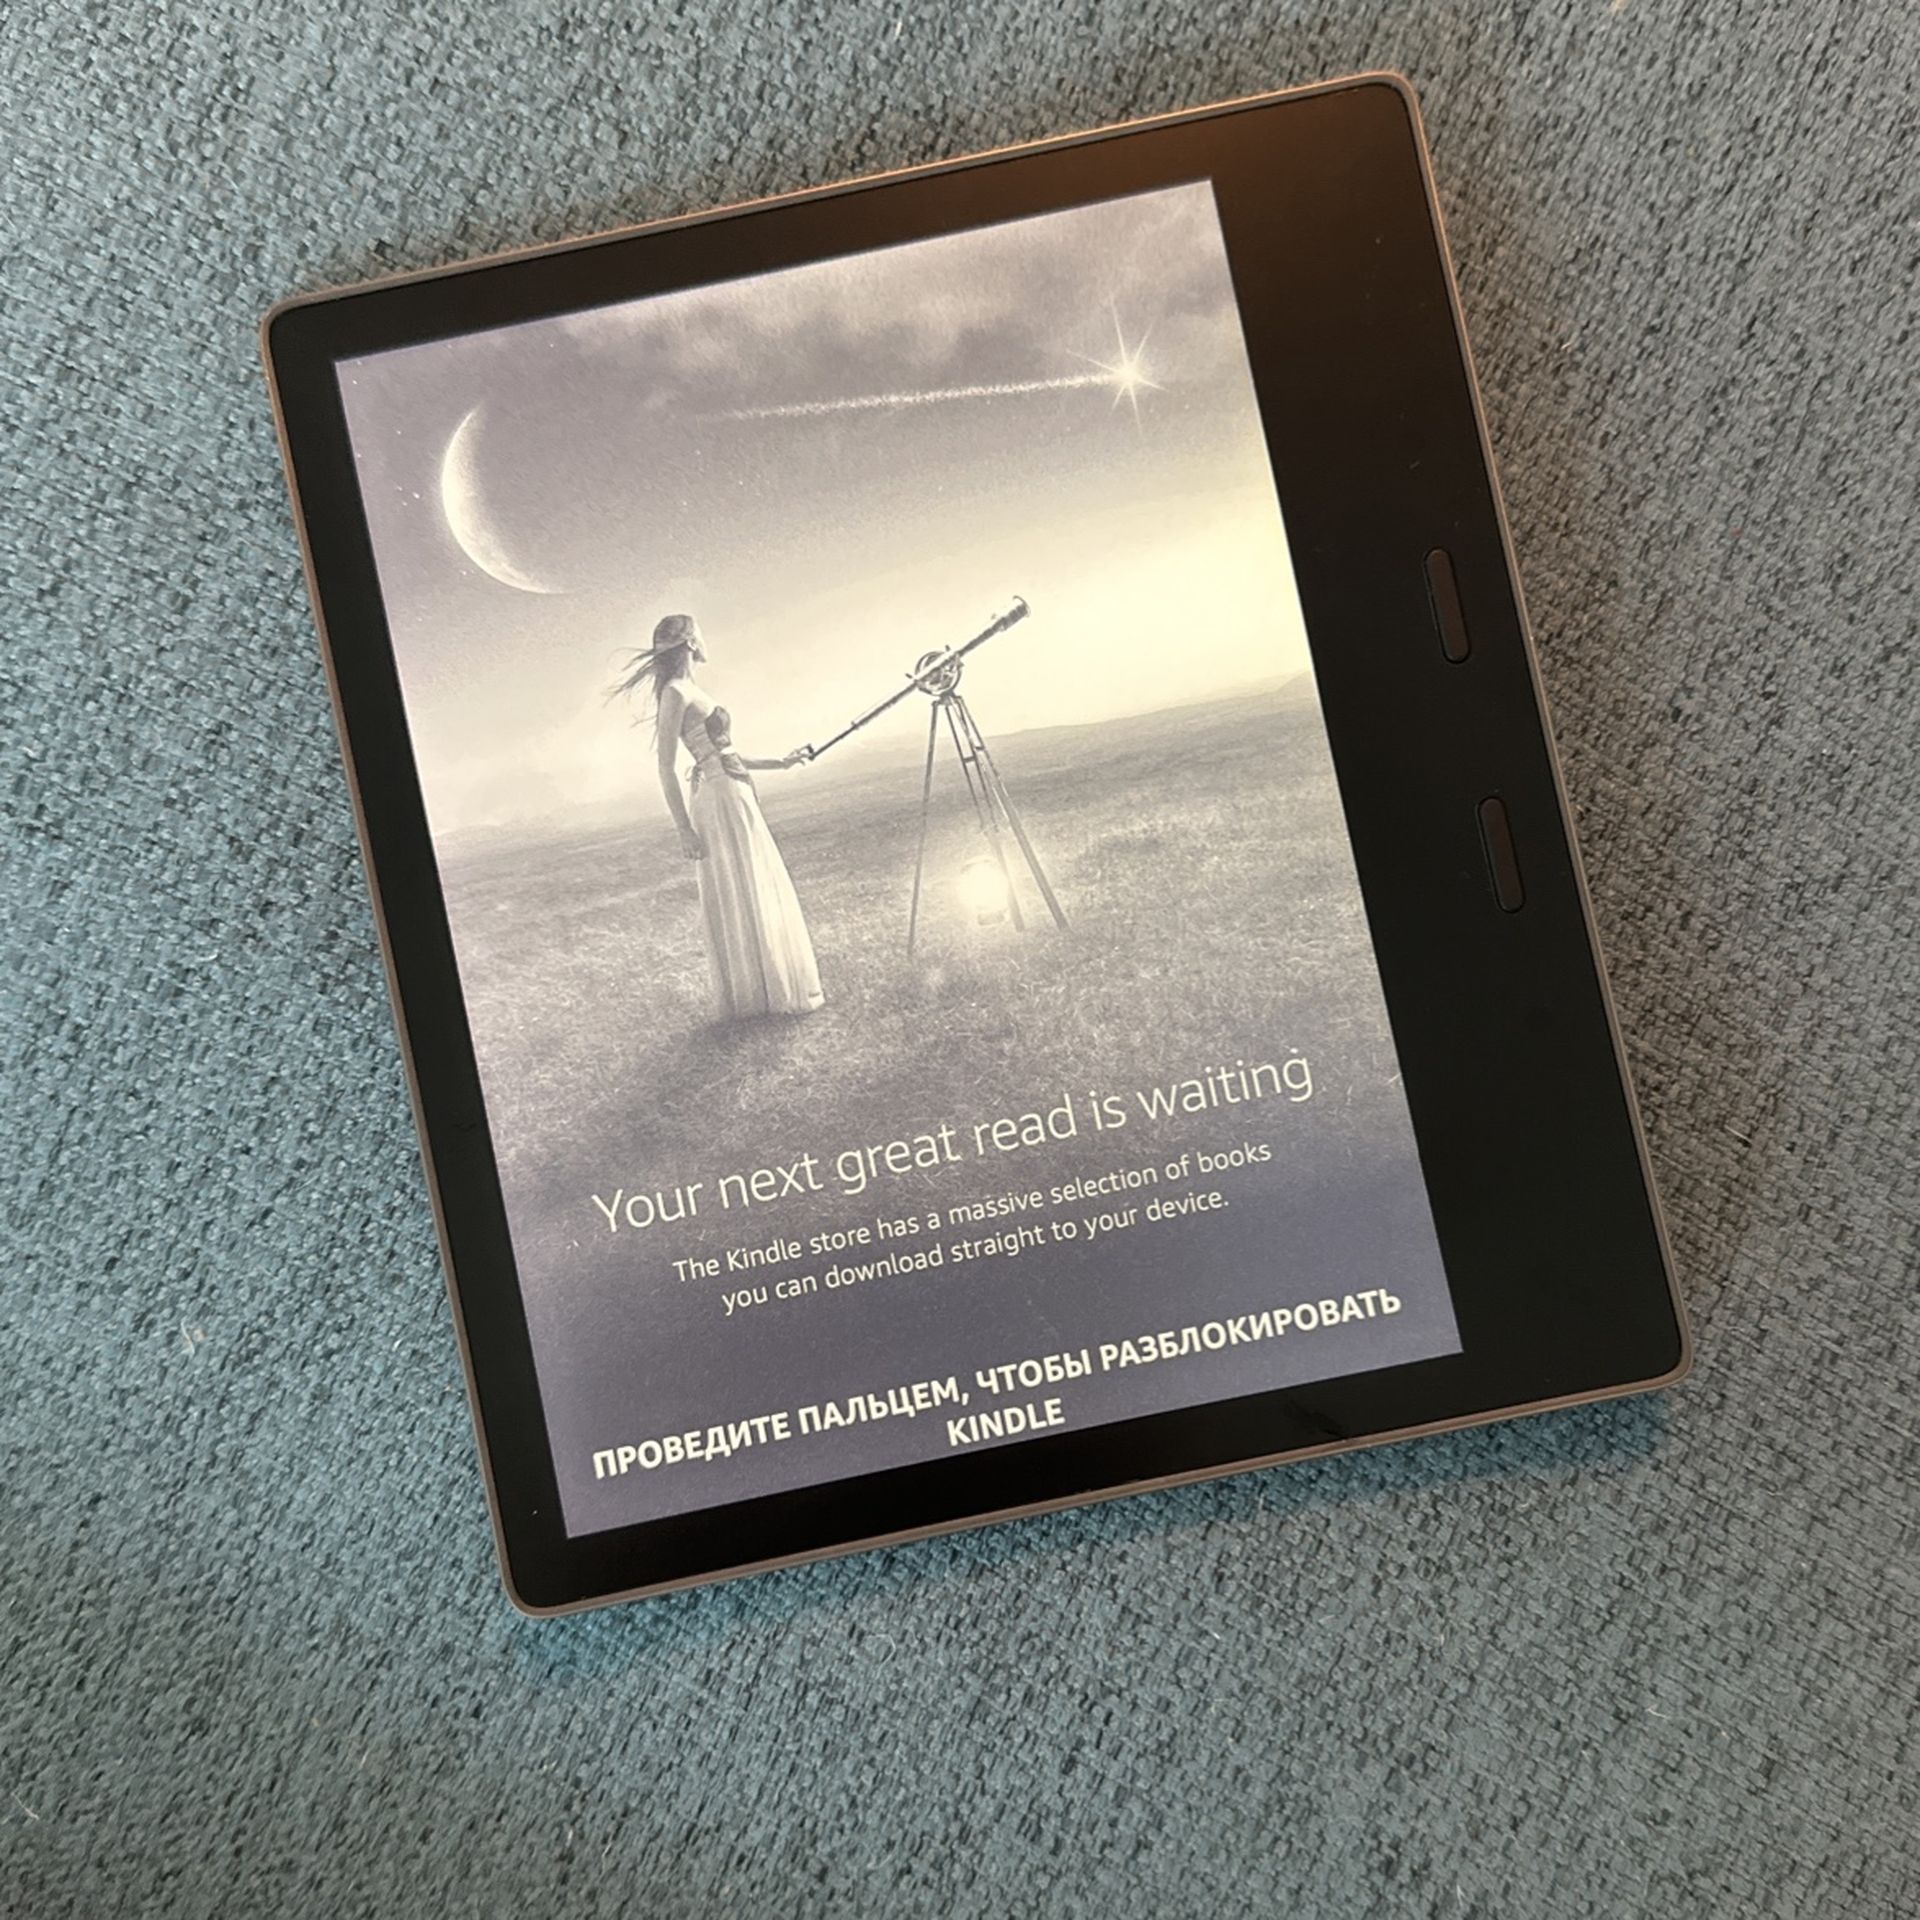 Kindle Oasis – With 7” display and page turn buttons